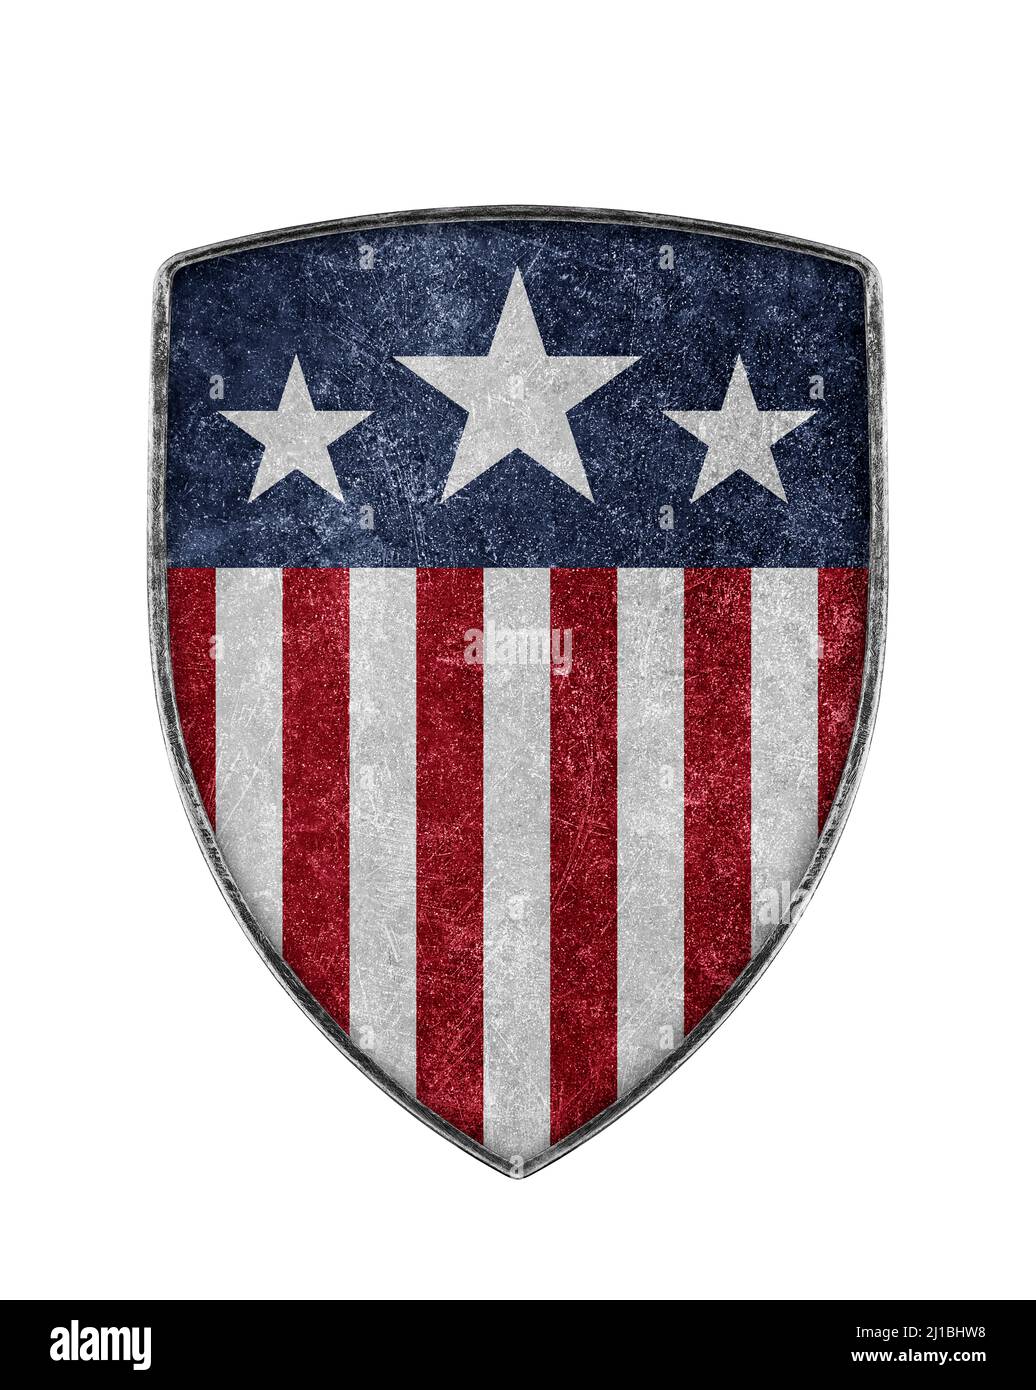 American shield with stars and stripes isolated on white background Stock Photo